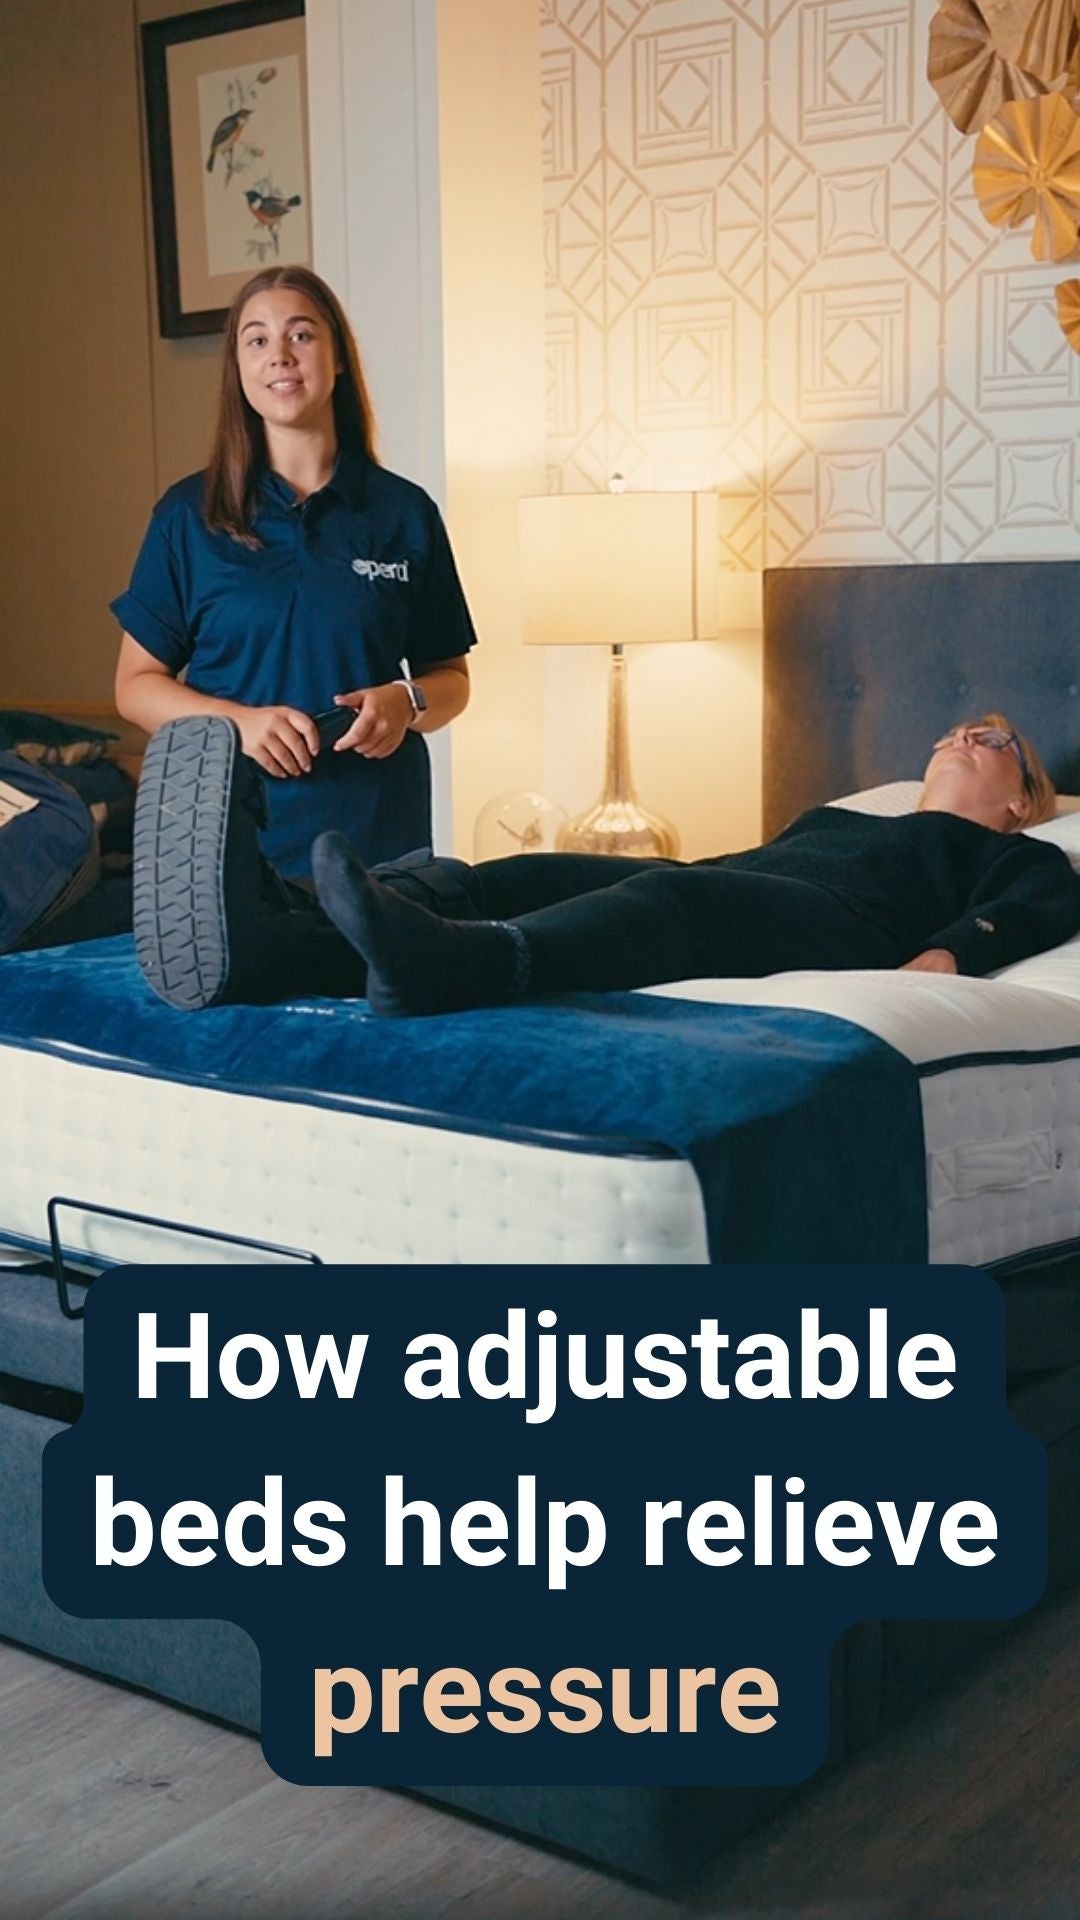 An opera advisor stood next to a lady laid on an adjustable bed with the caption 'How adjustable beds help relieve pressure'